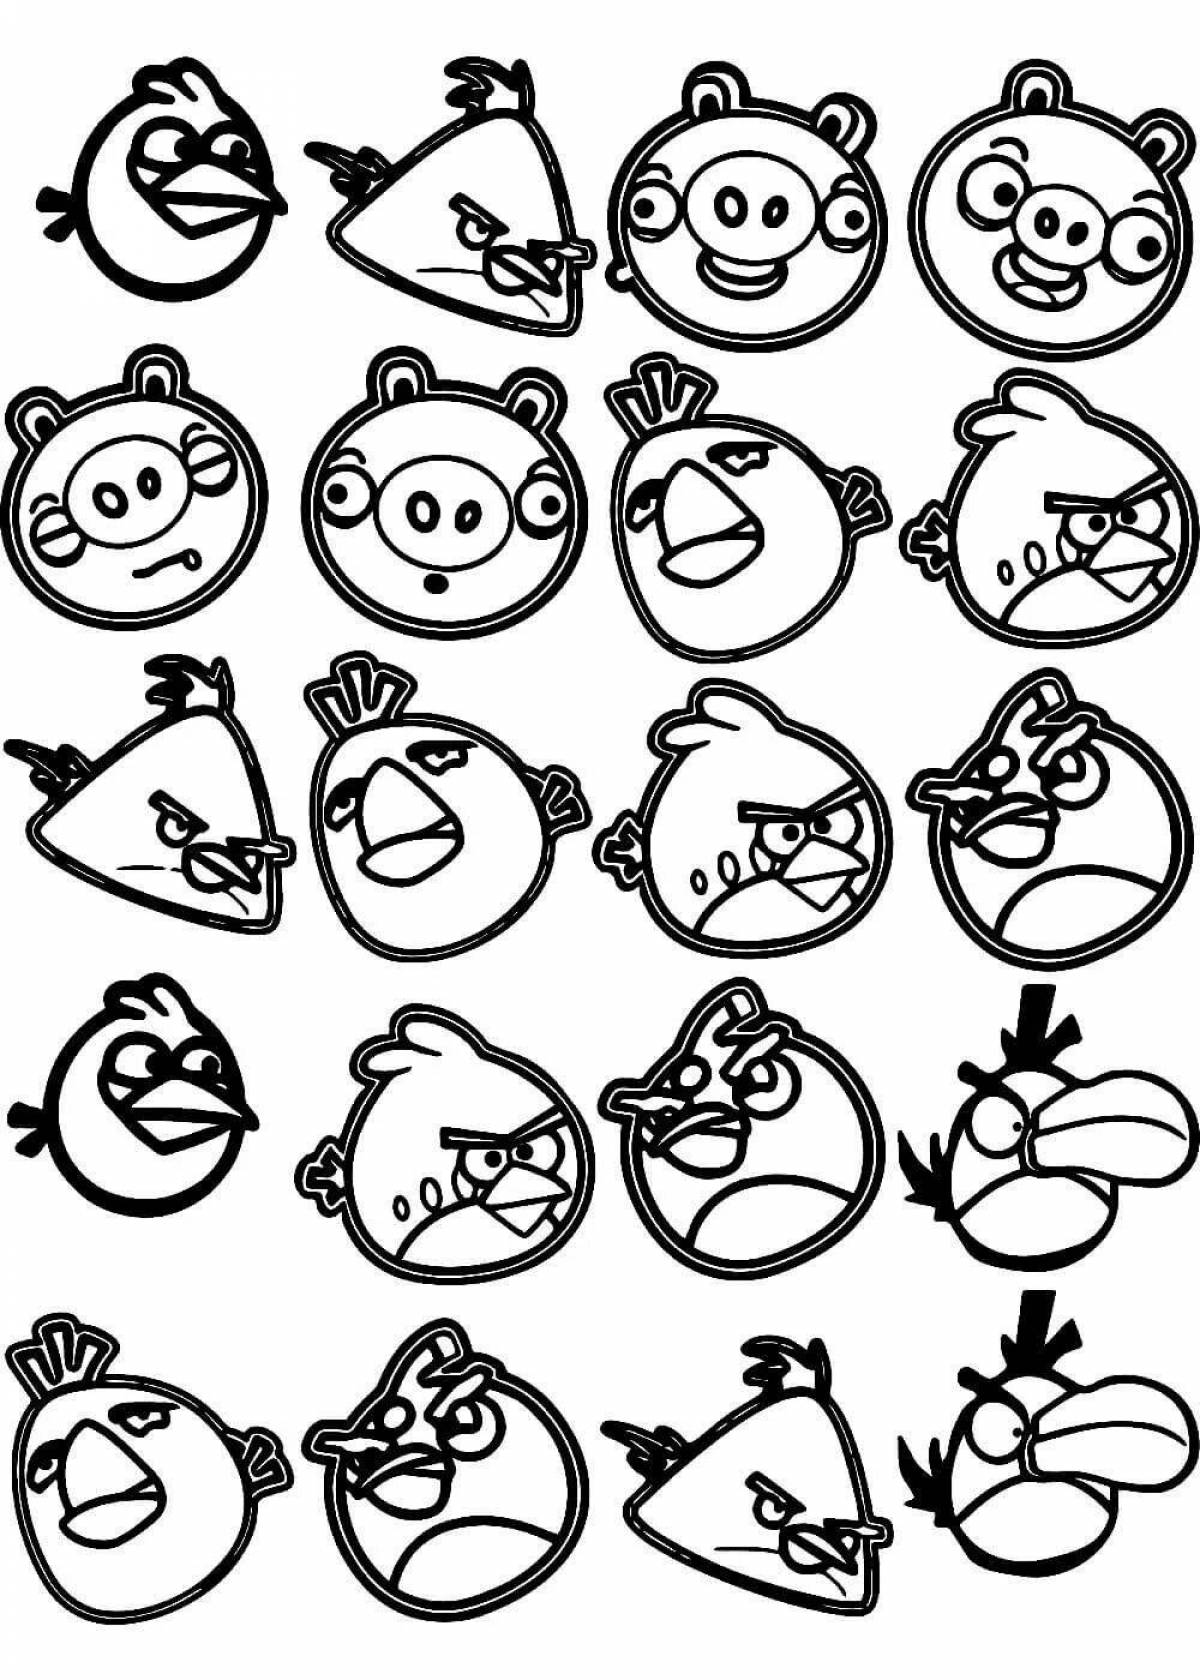 Colorful cartoon coloring pages for boys